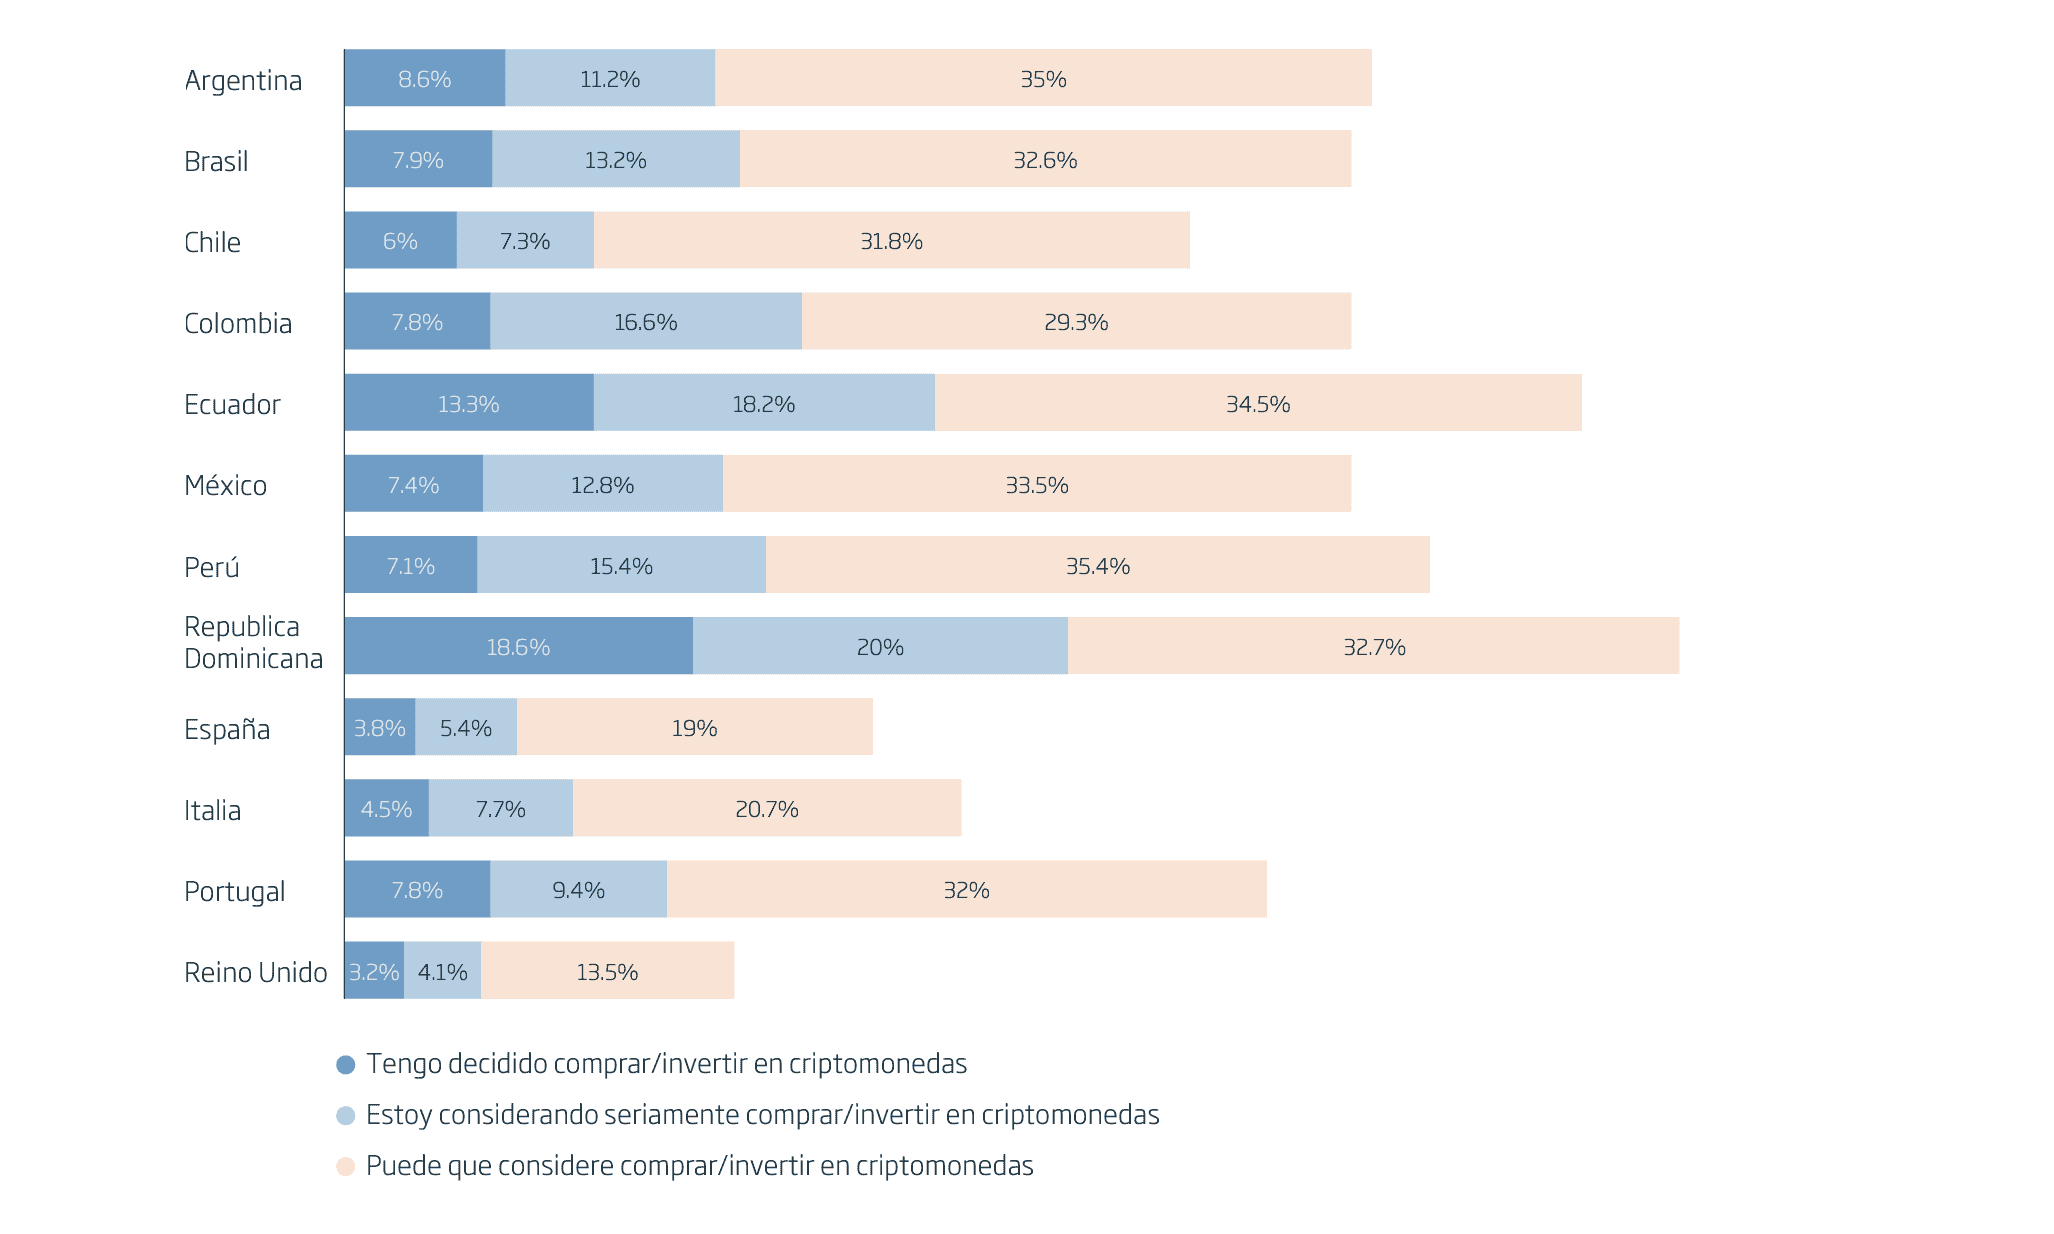 Percentage of banked population considering buying or investing in cryptocurrencies in the near future.